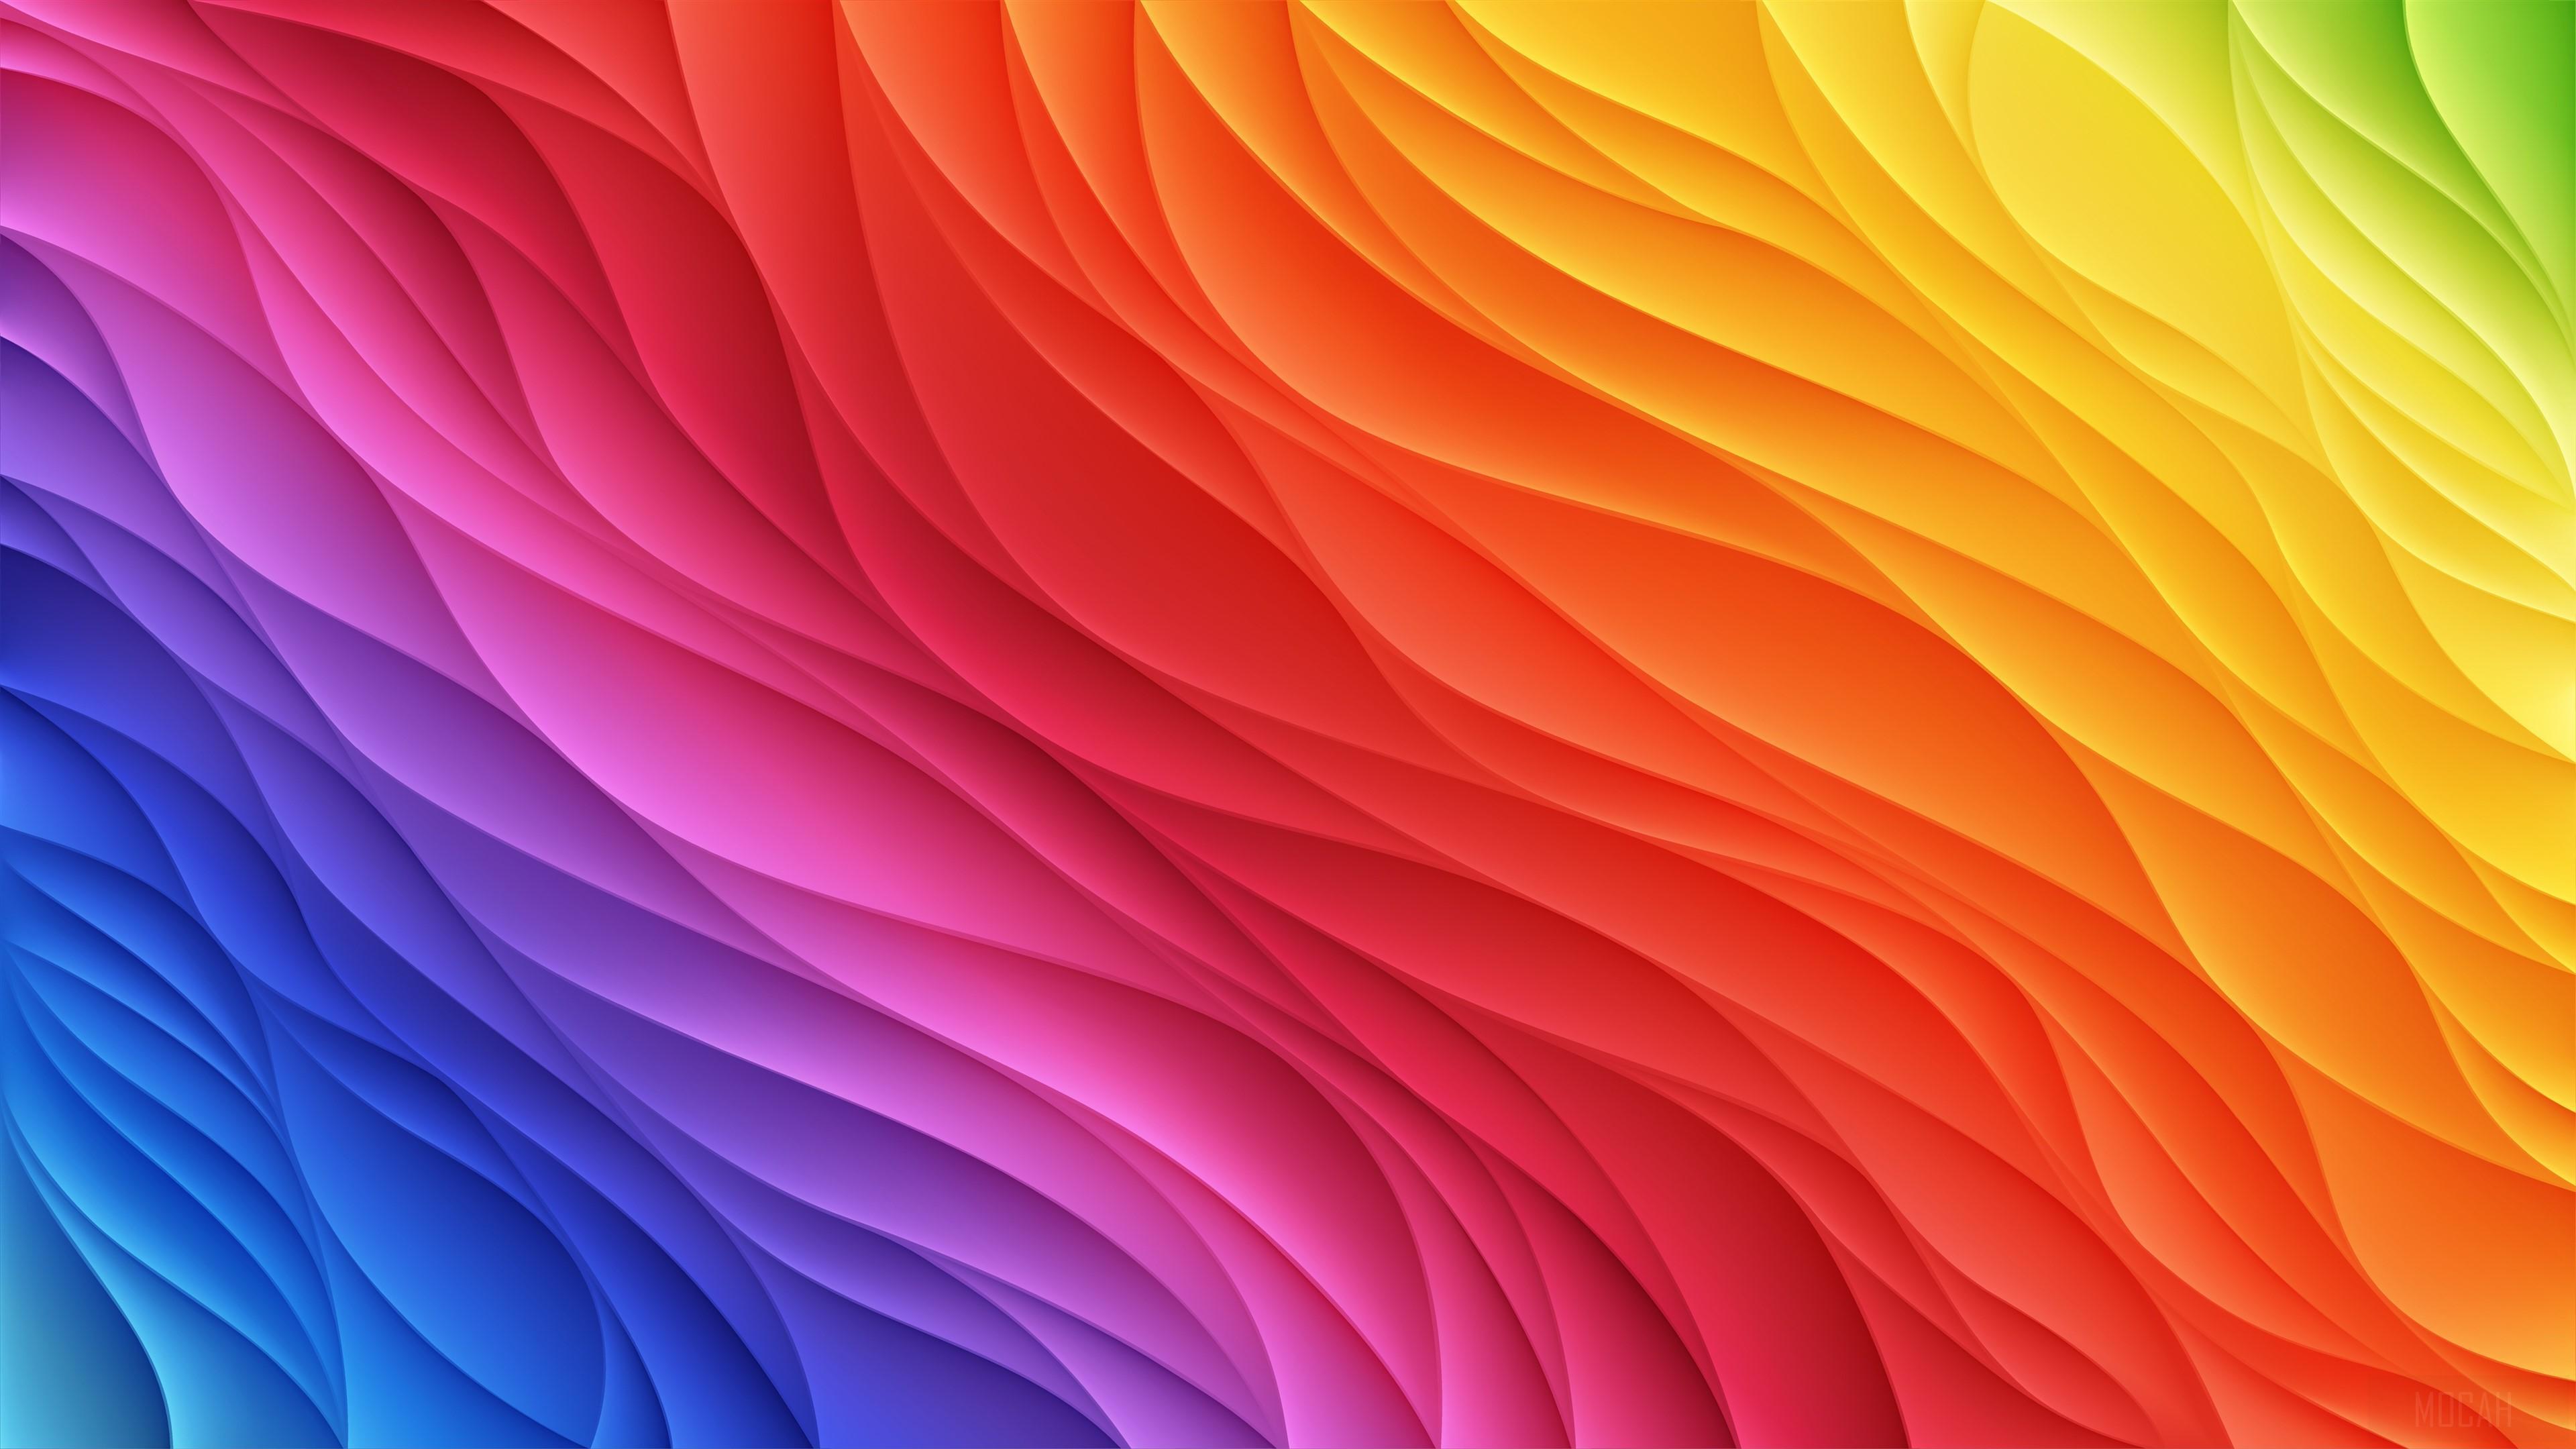 HD wallpaper, Abstract Blue Red Yellow 4K